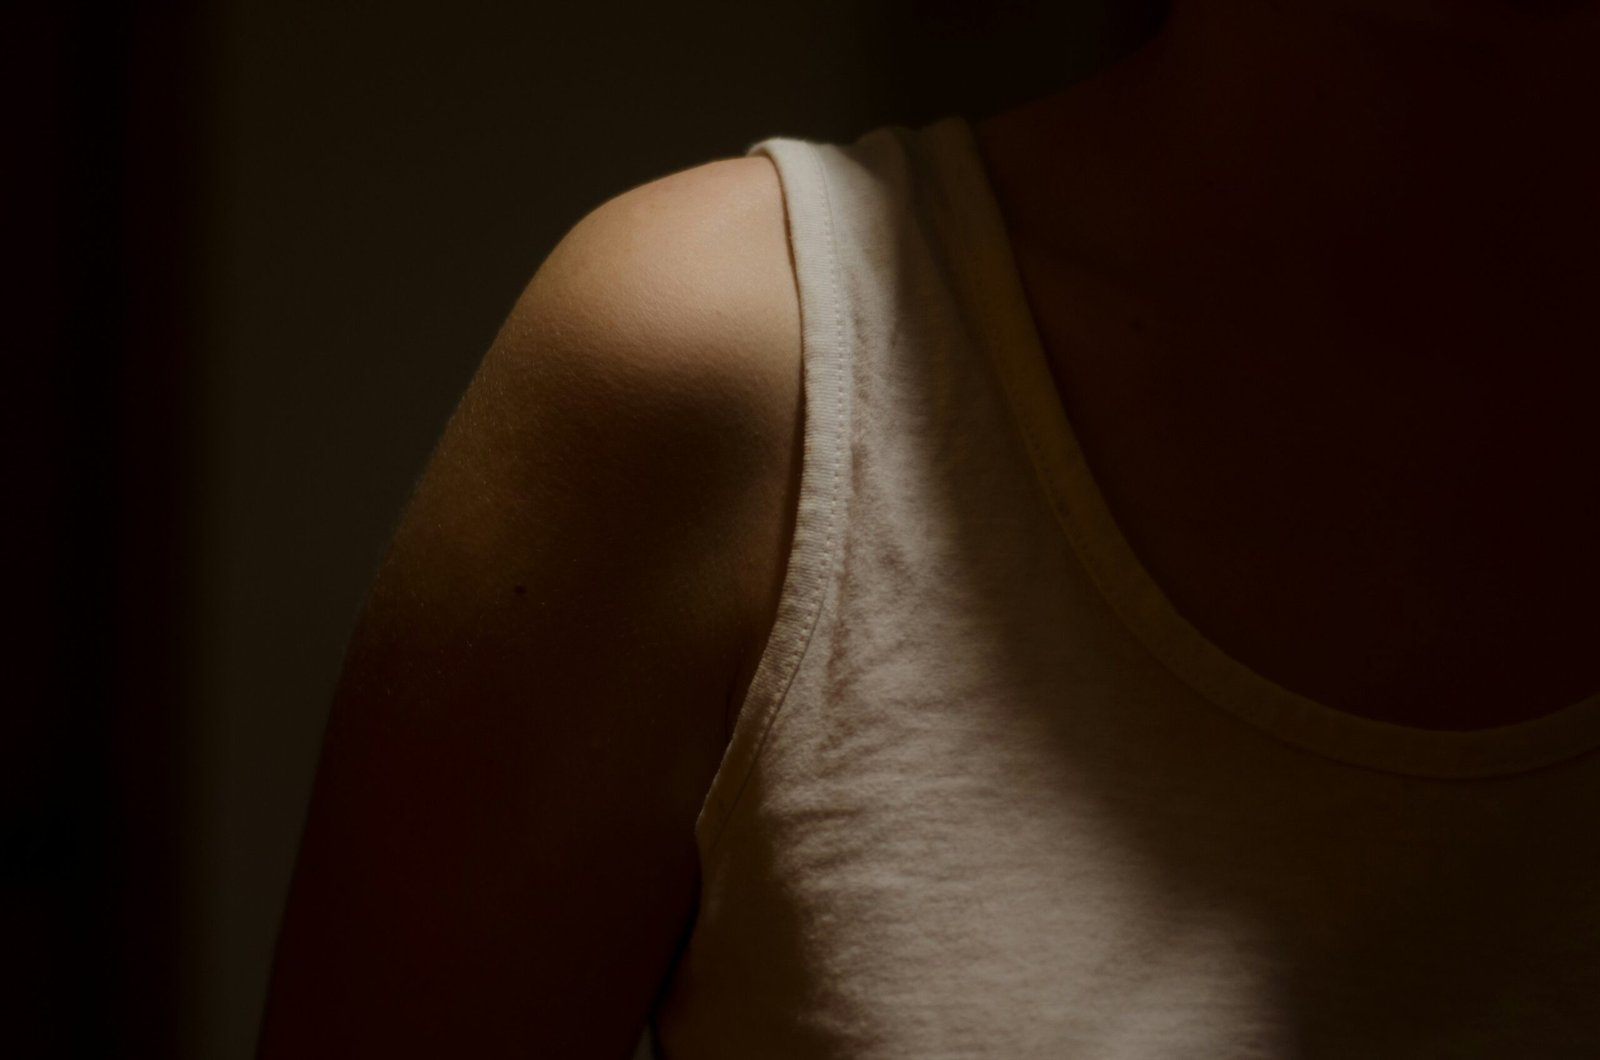 Can Gout Cause Shoulder Pain?